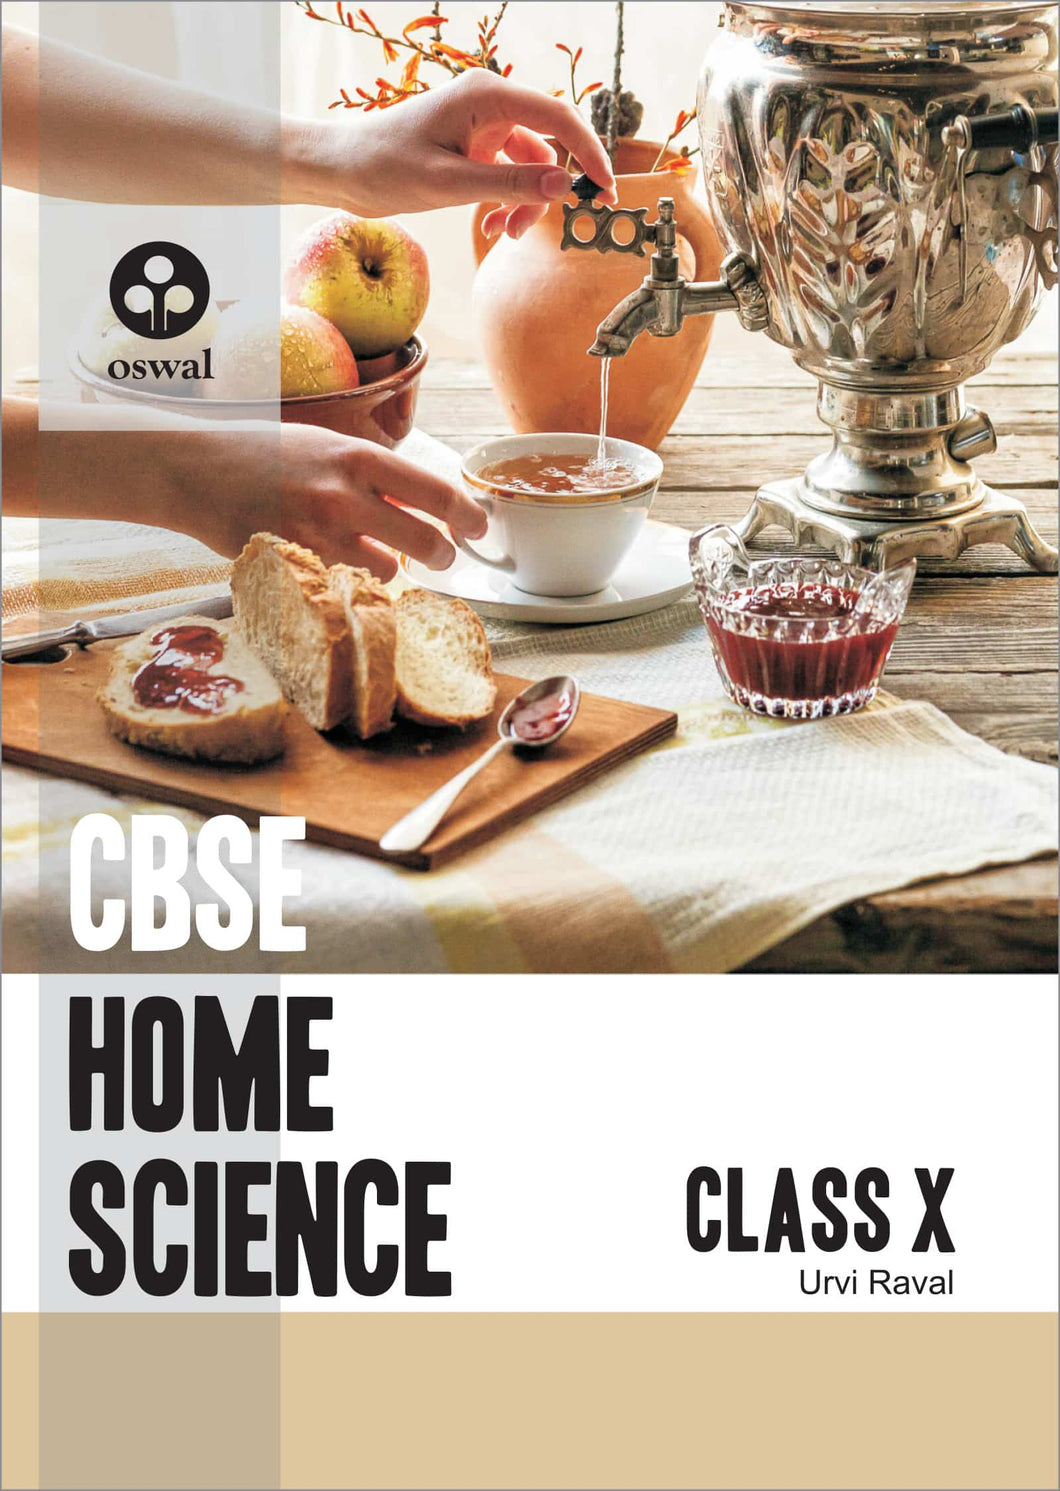 Oswal Home Science: Textbook for CBSE Class 10